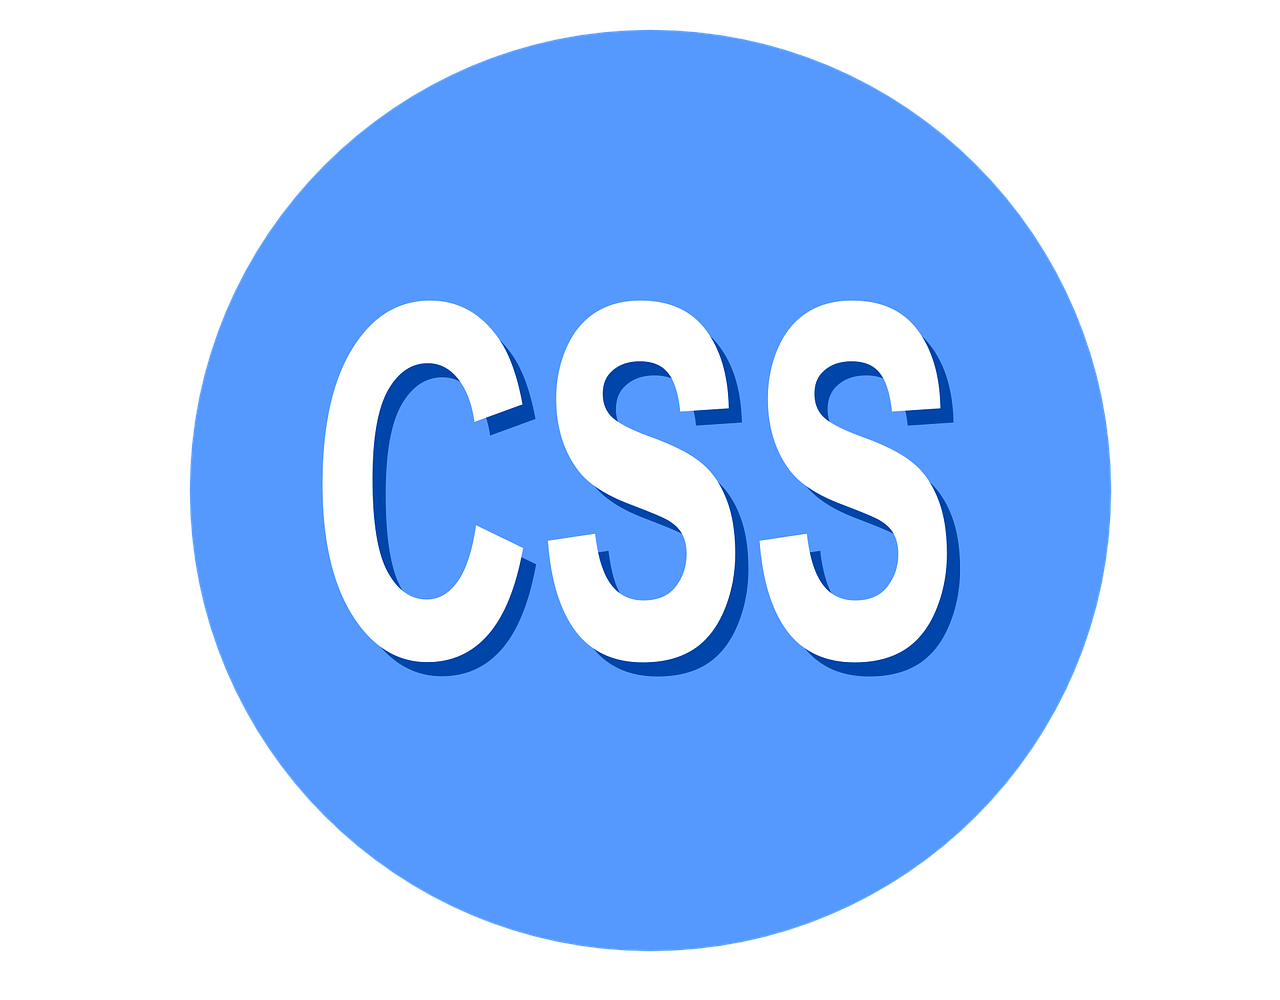 5 advanced CSS tricks that every designer should know